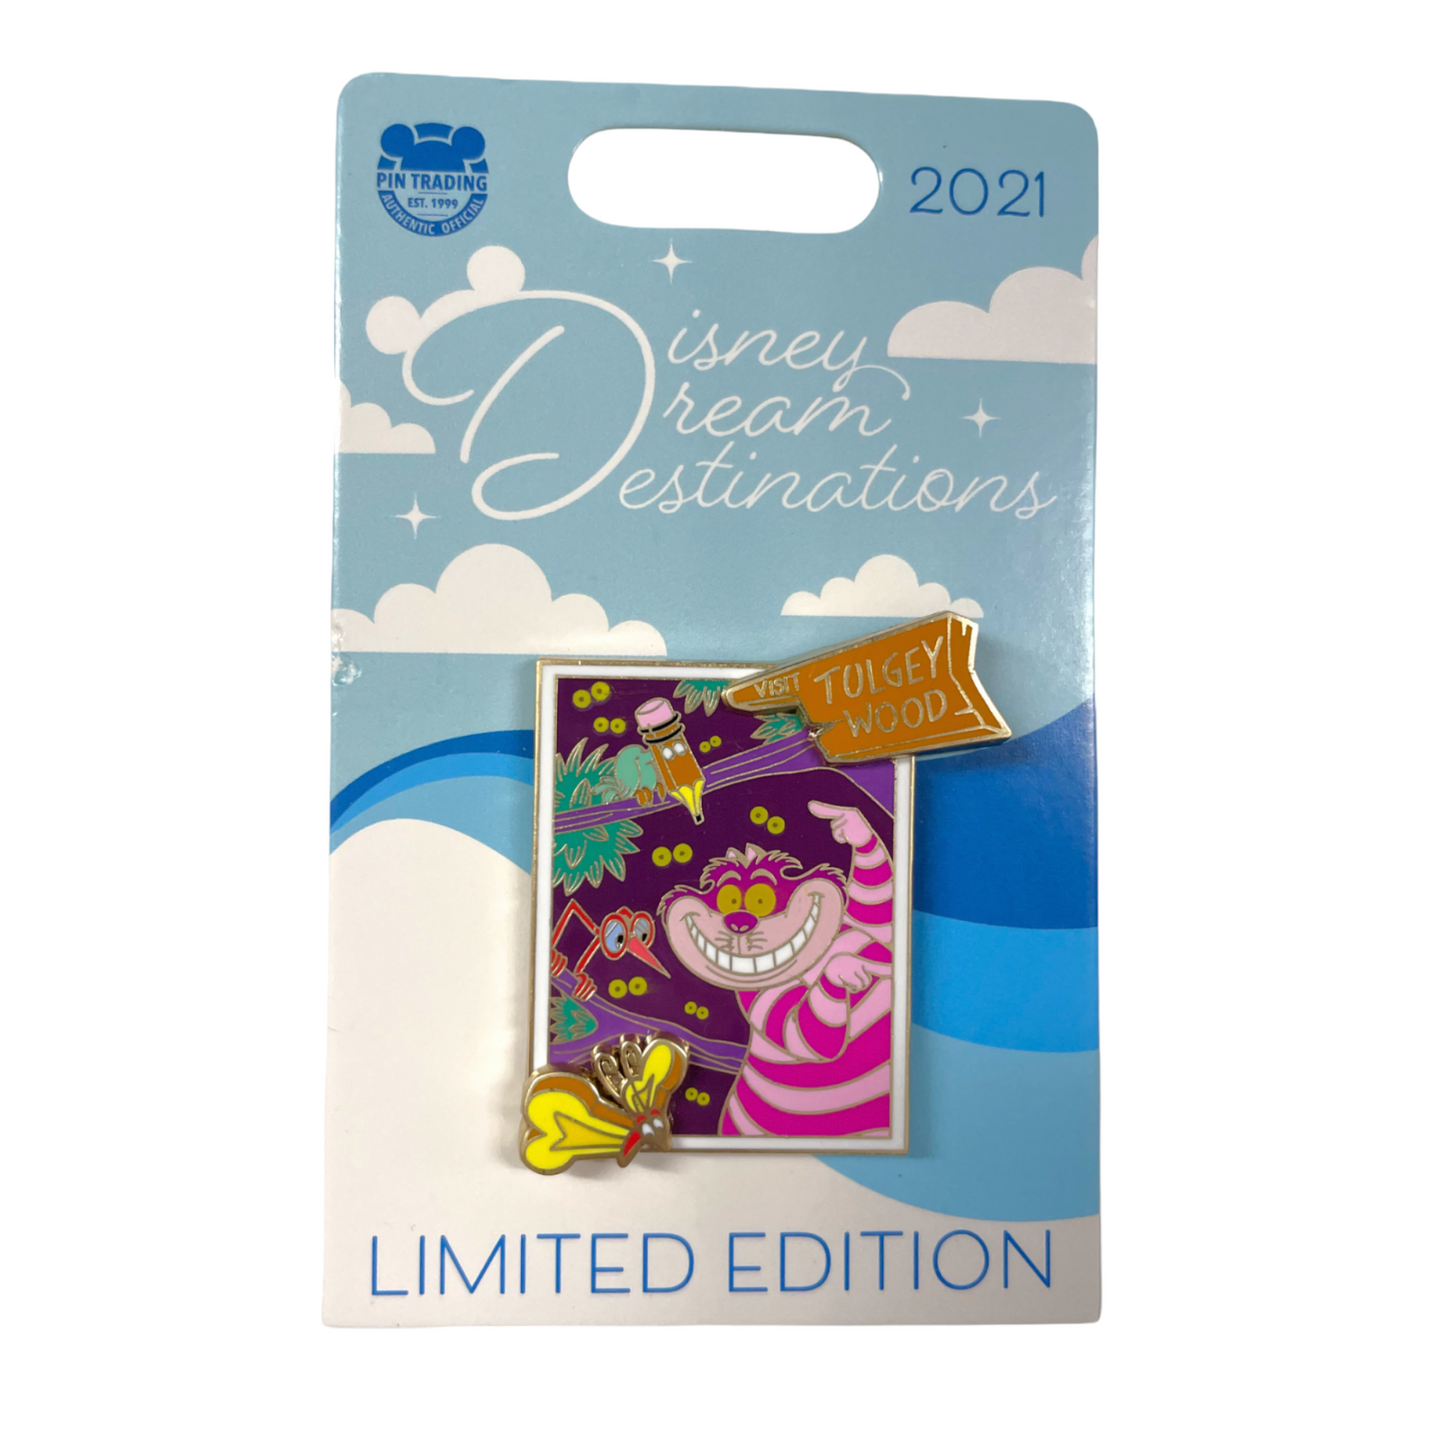 Disney Dream Destinations - Visit Tugey Wood - Cheshire Cat - Limited Edition 2500